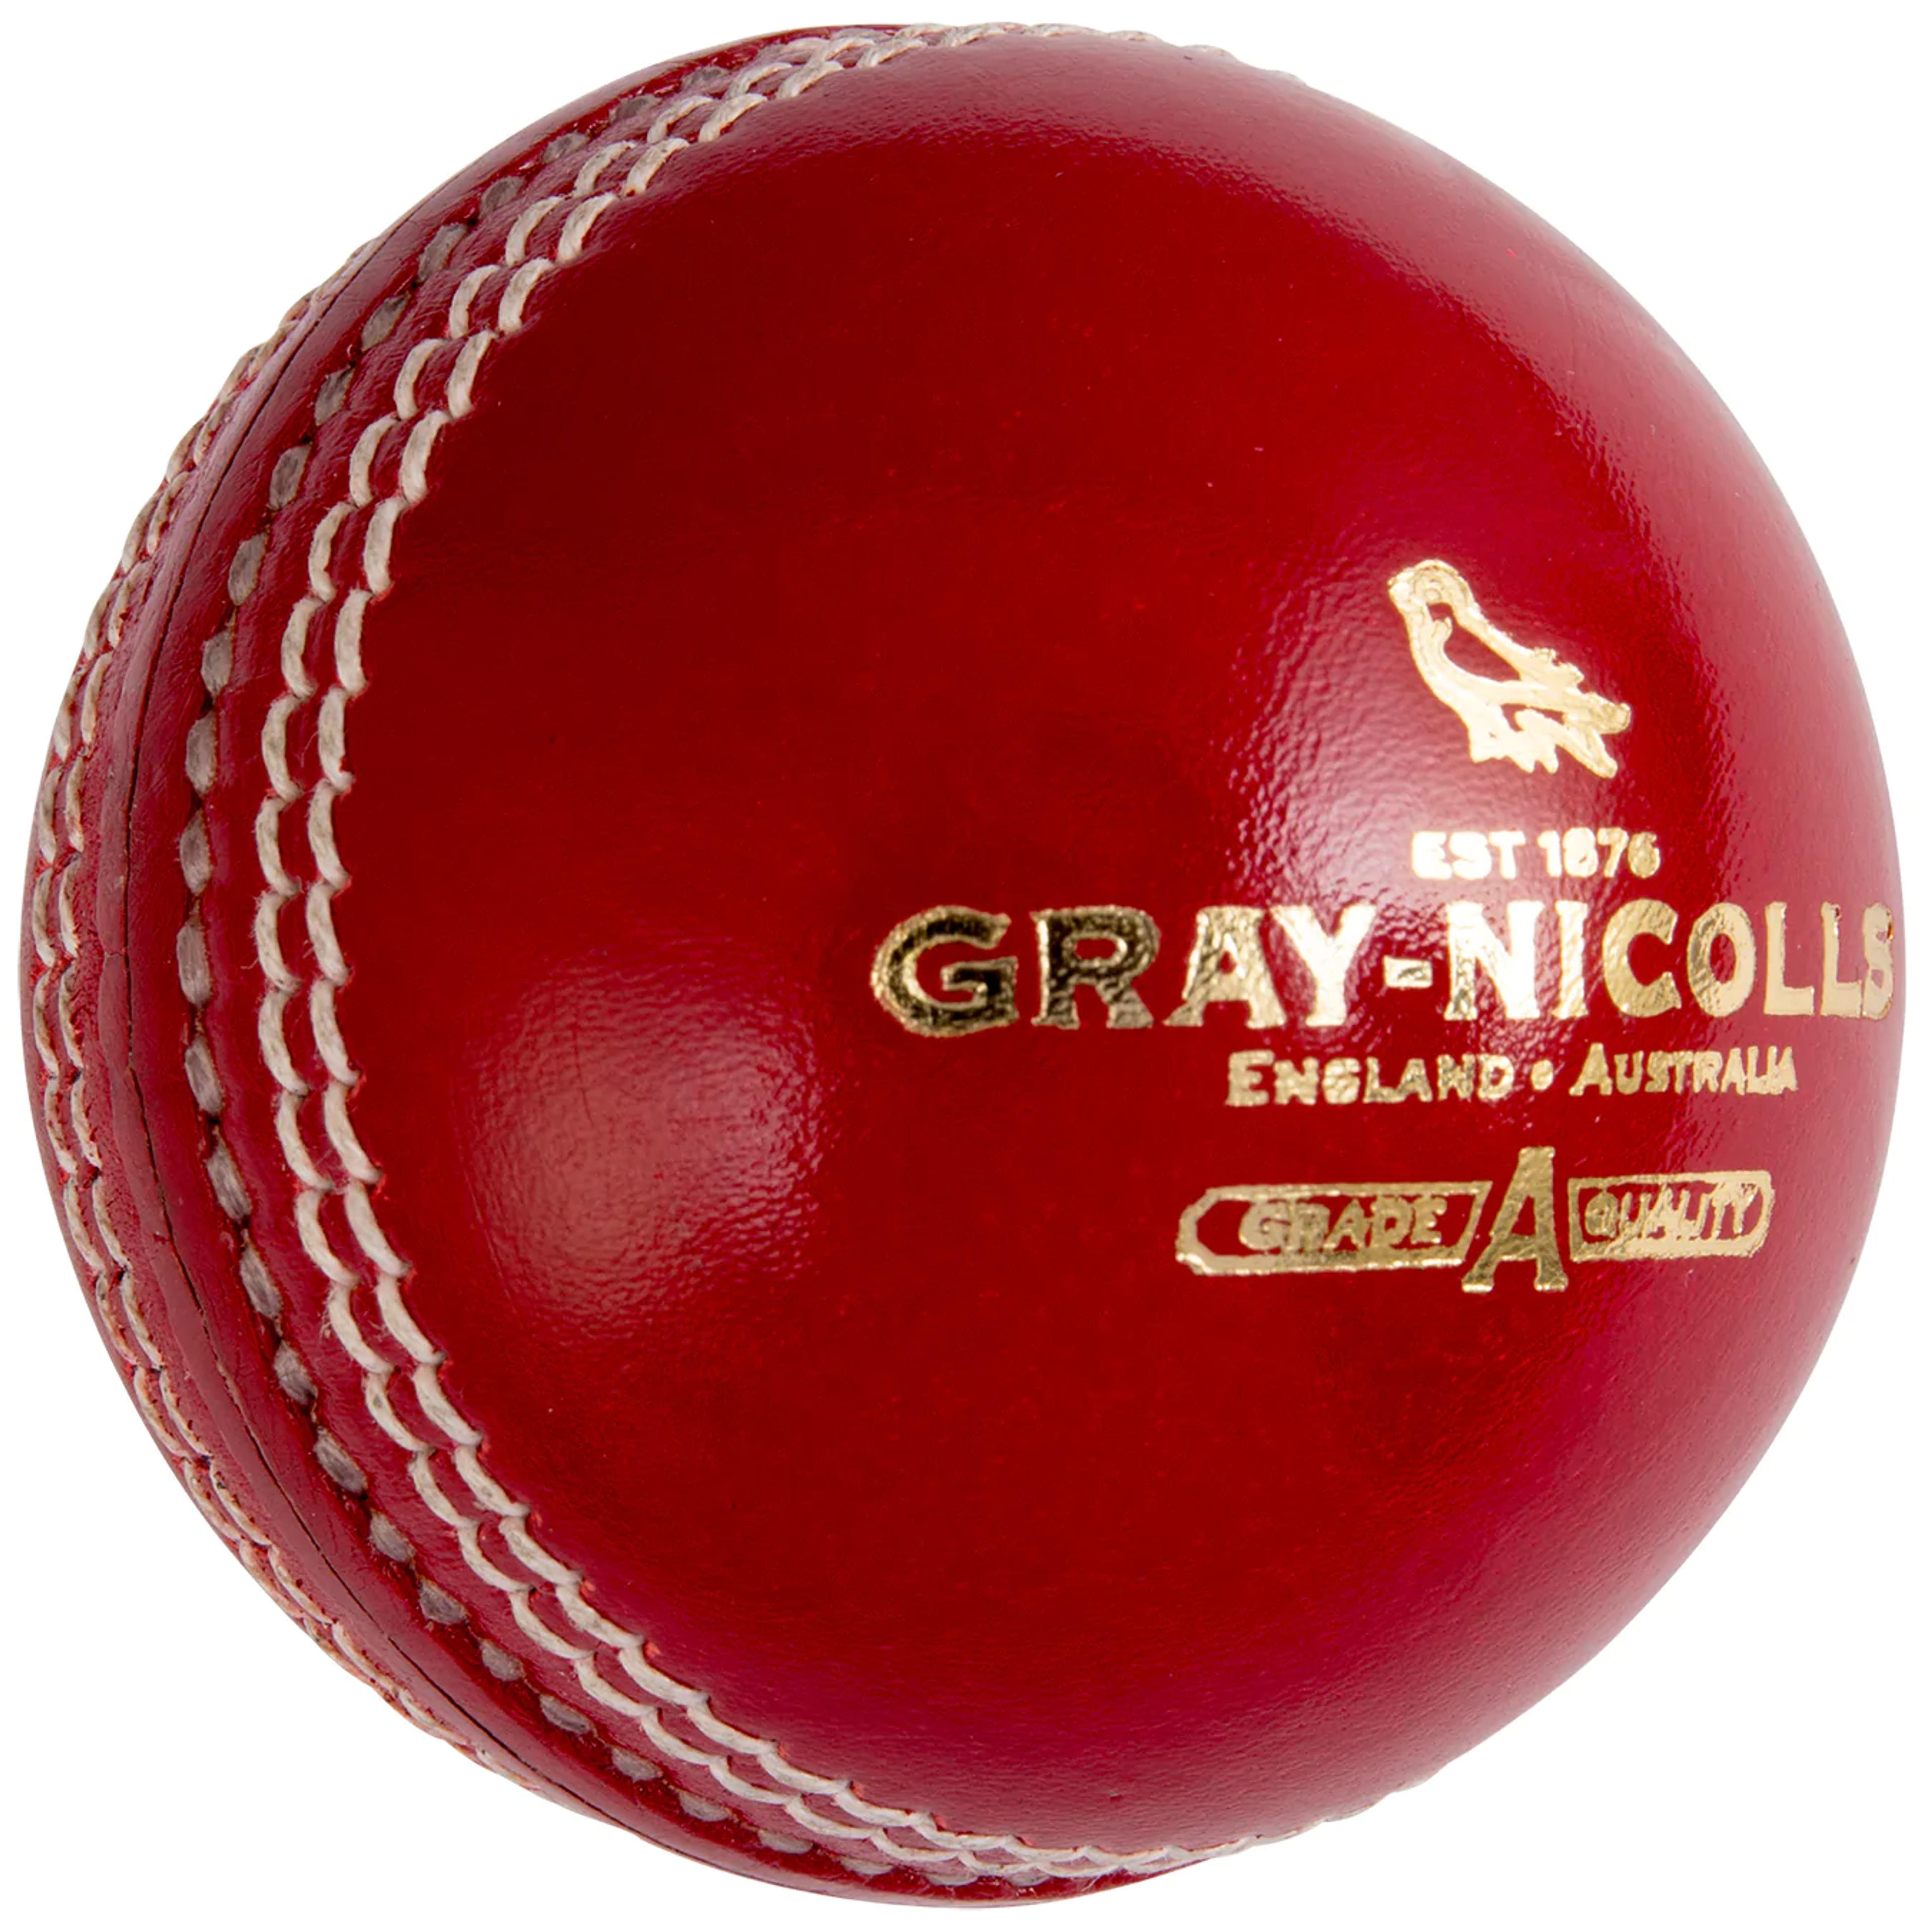 Crest Academy Cricket Ball | Gray-Nicolls - Free Shipping, Loyalty Points